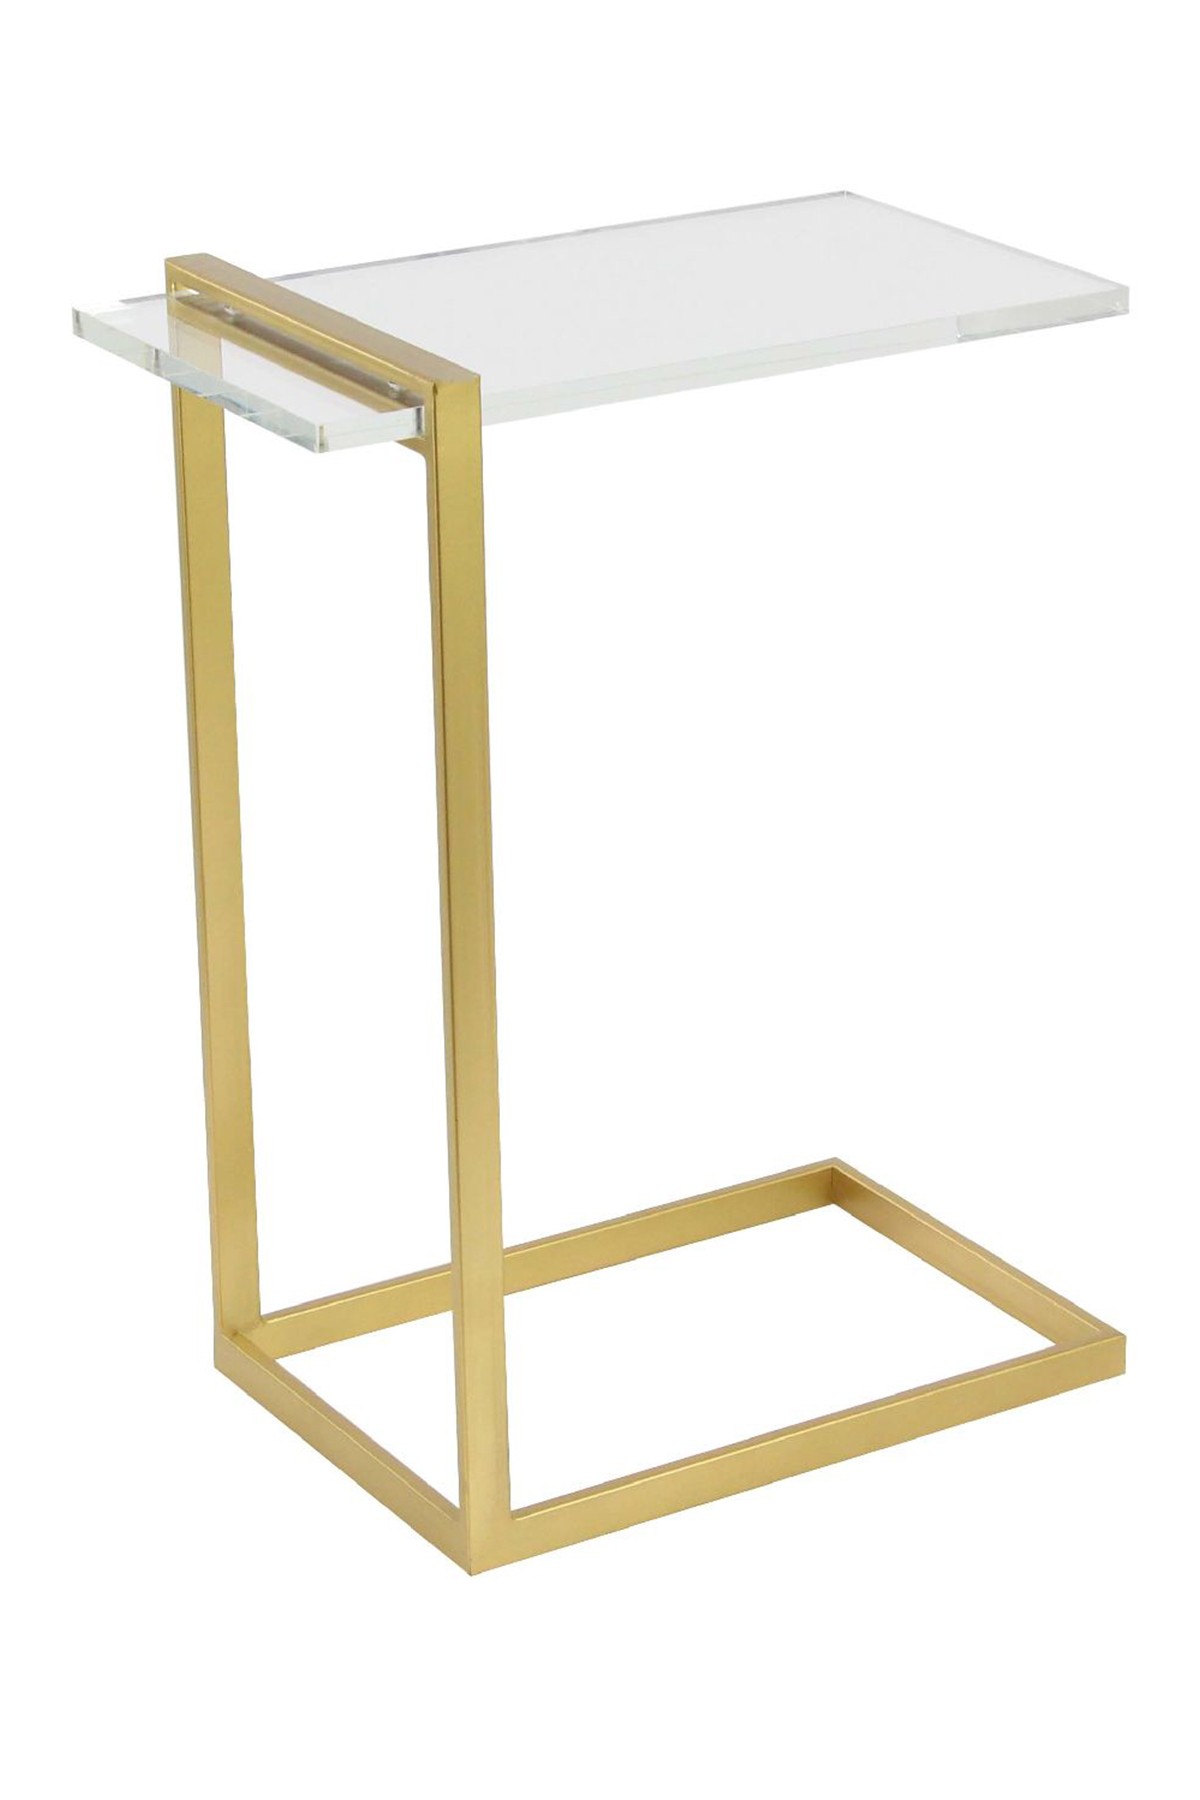 uma gold metal acrylic accent table nordstrom rack outdoor tables tier target kmart marble unfinished cabinets coffee threshold cabinet white square base only cherry dining room